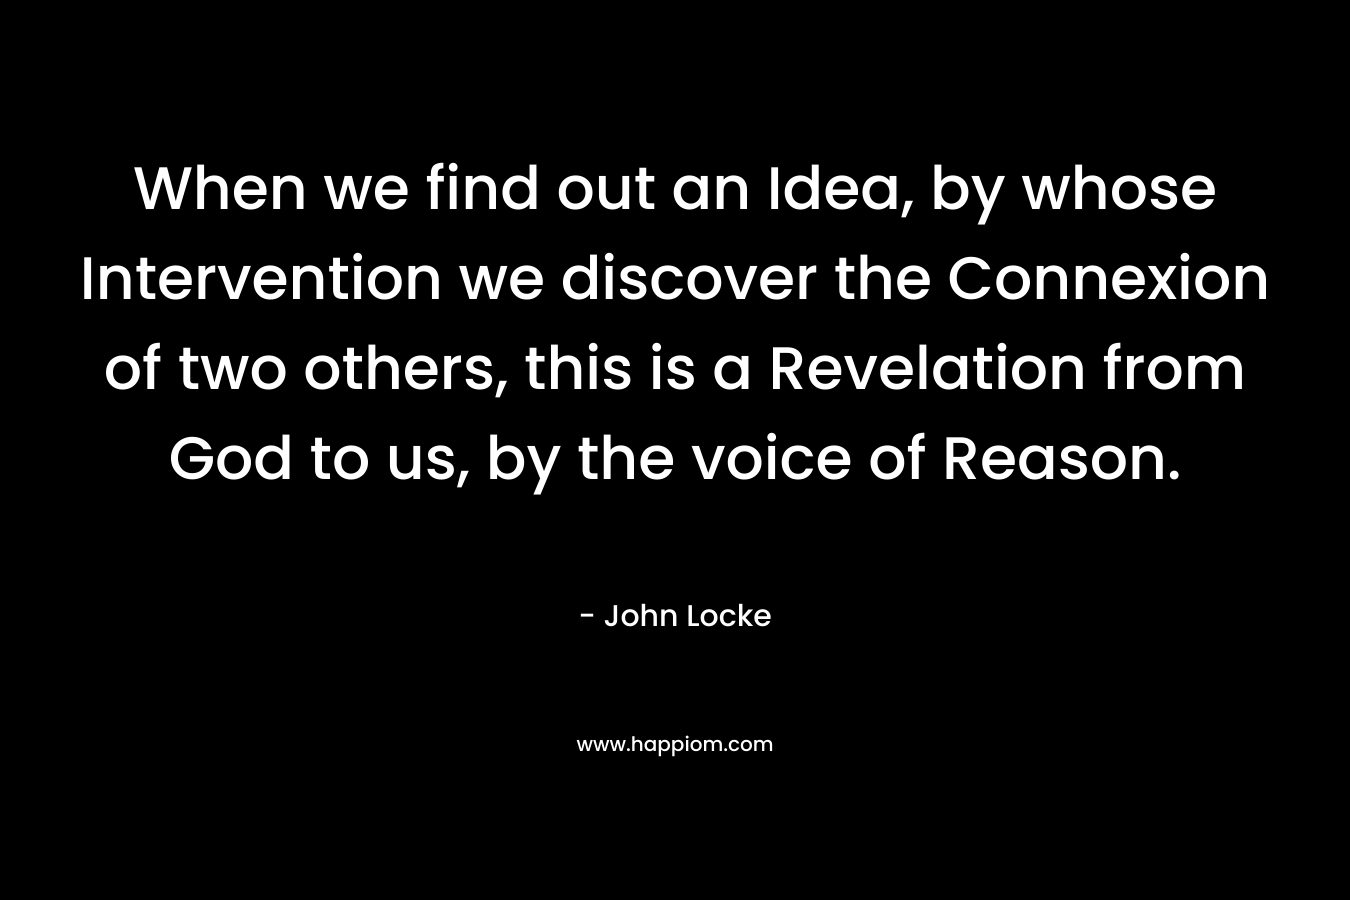 When we find out an Idea, by whose Intervention we discover the Connexion of two others, this is a Revelation from God to us, by the voice of Reason.